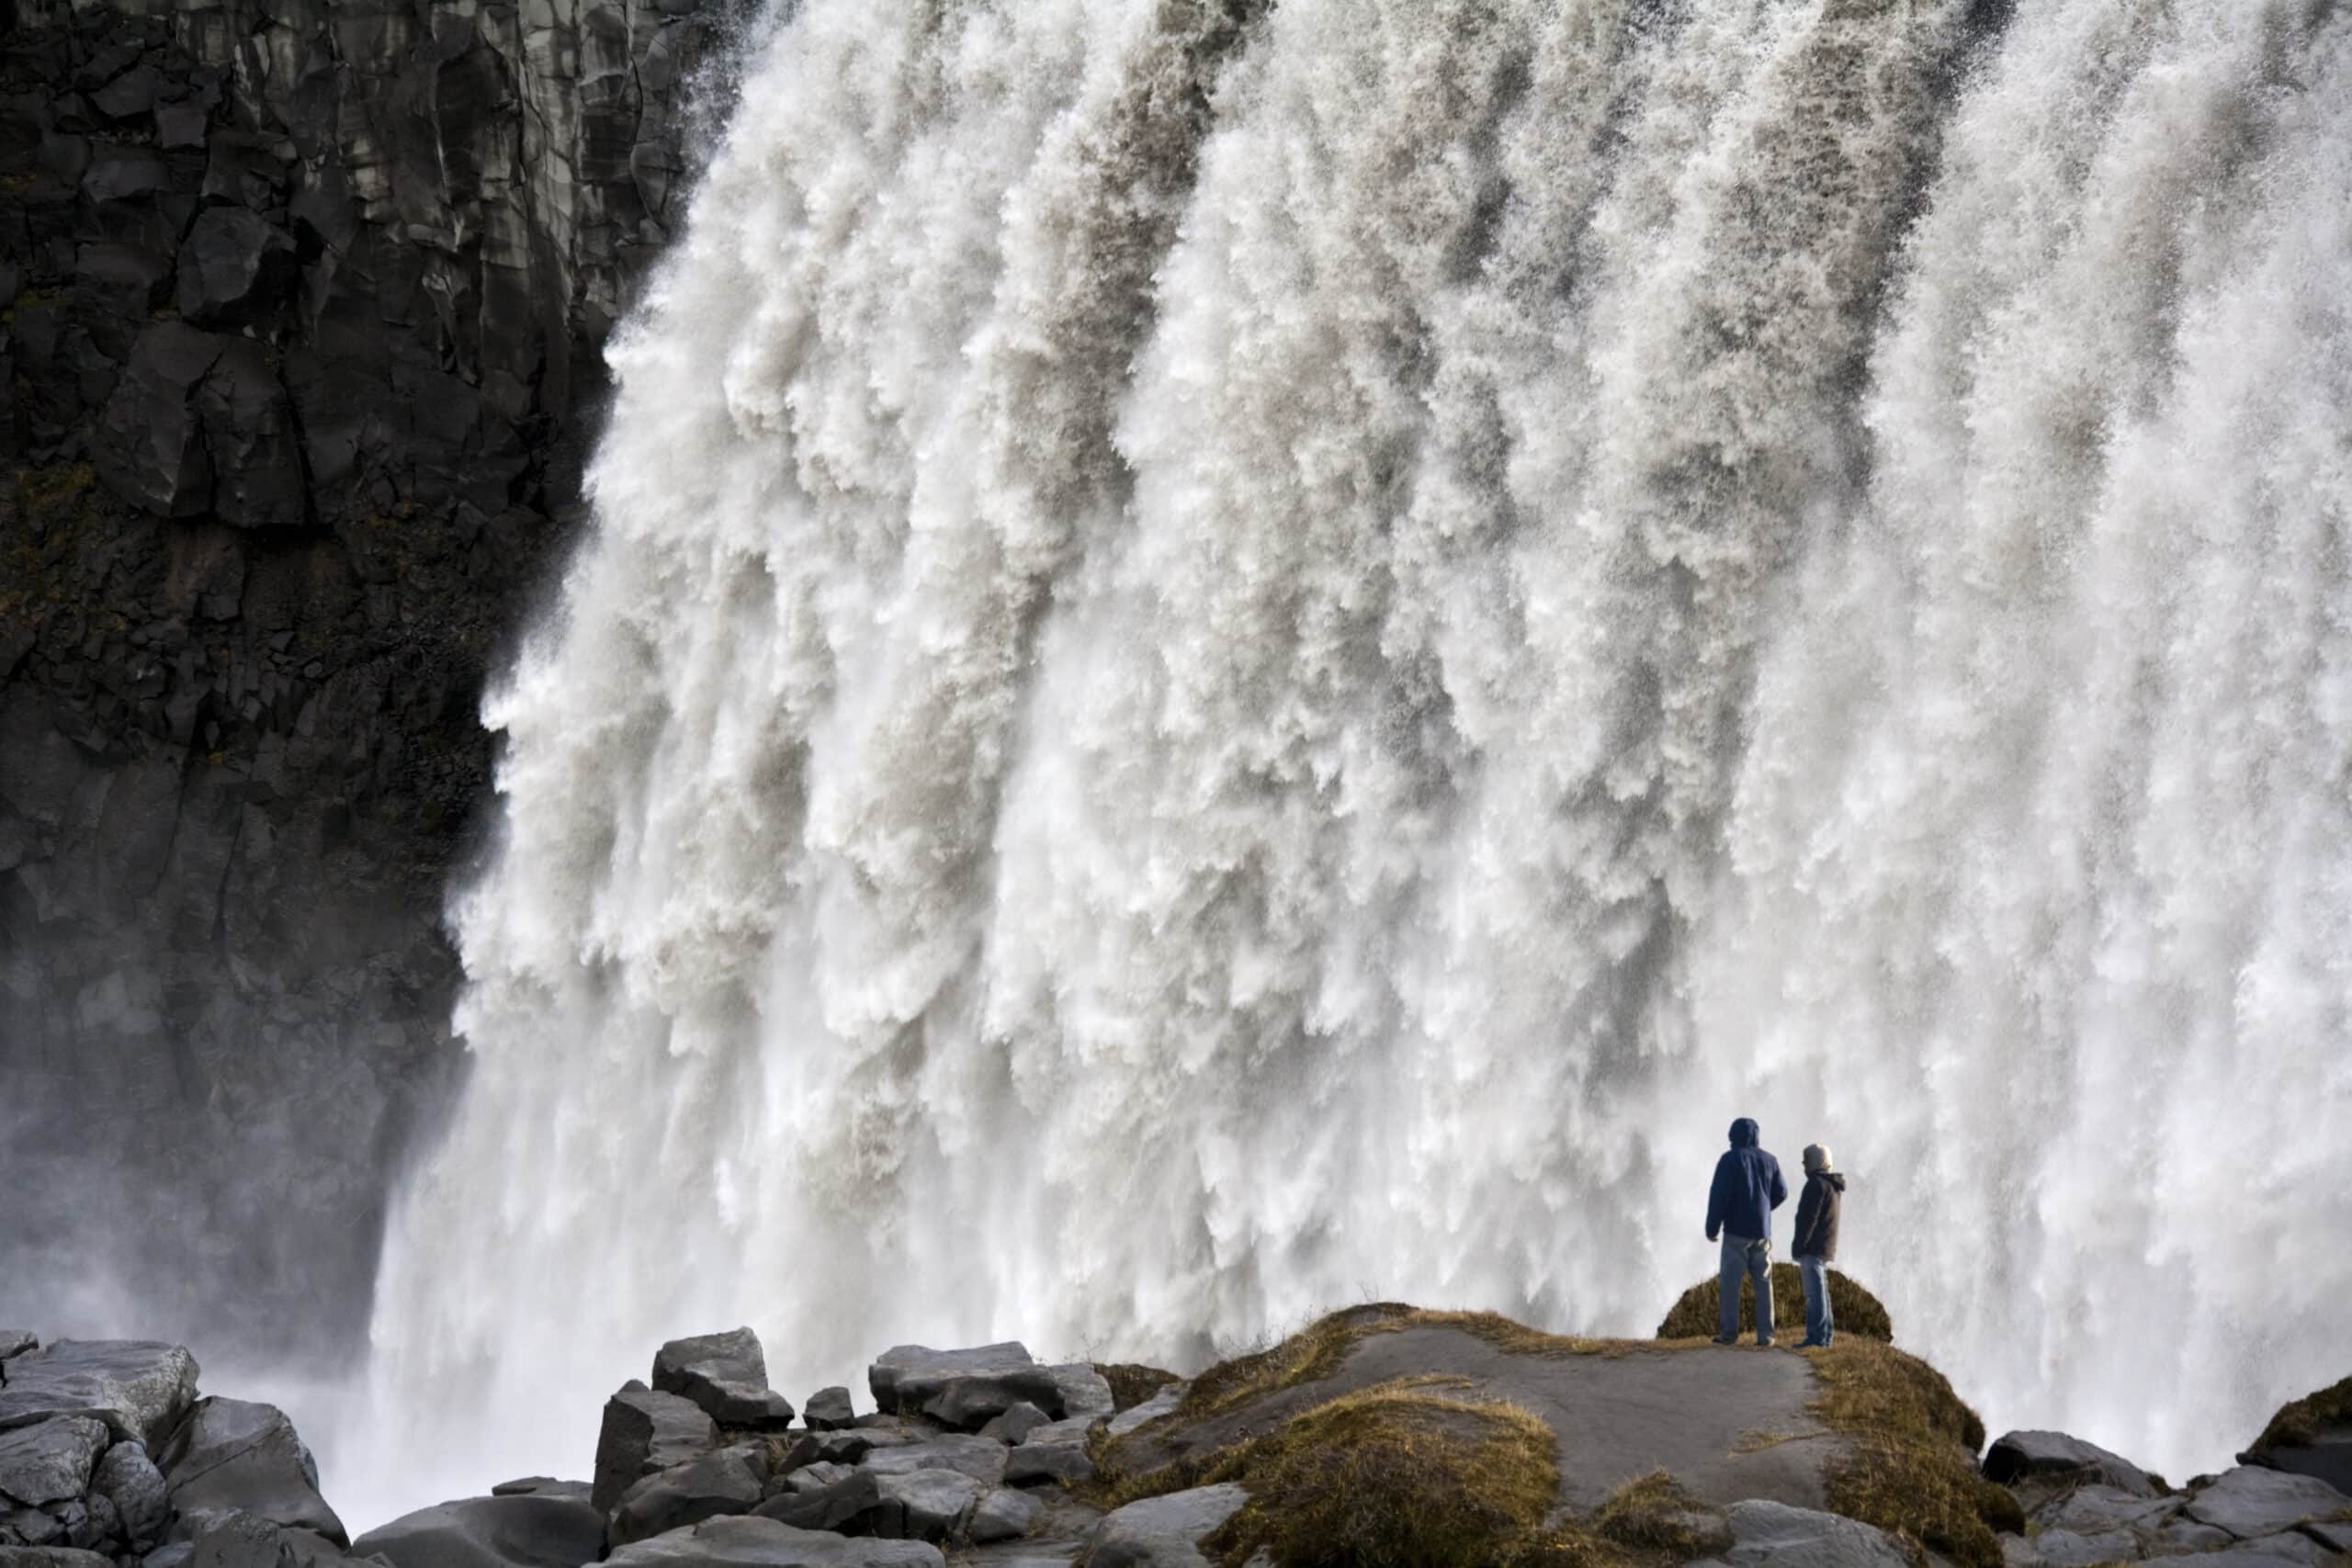 Two people standing in front of the enormous Dettifoss Waterfall in North Iceland.